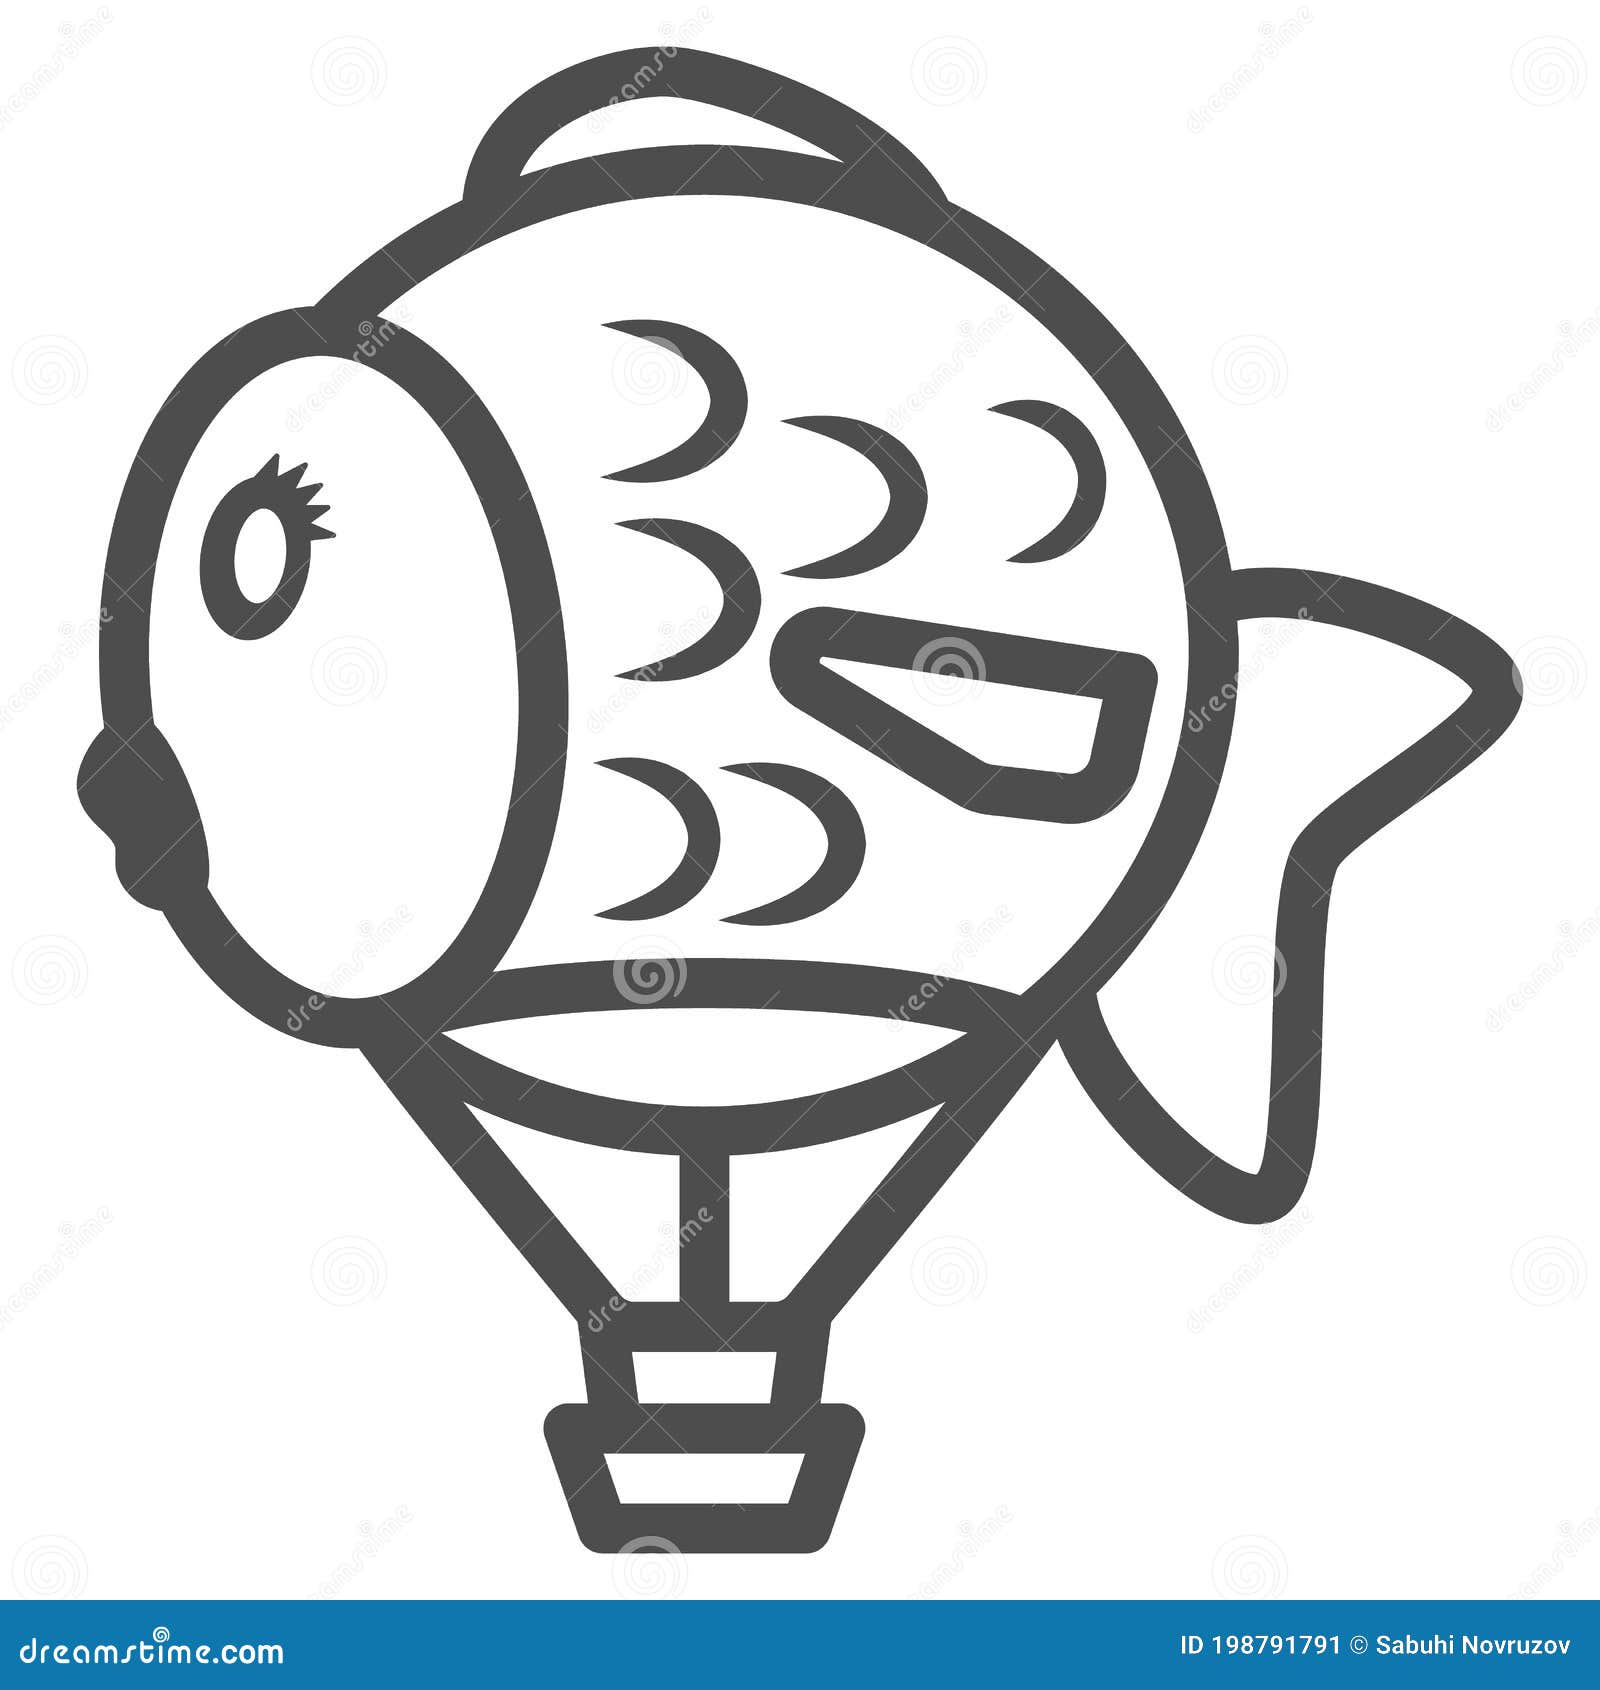 https://thumbs.dreamstime.com/z/balloon-shape-fish-line-icon-balloons-festival-concept-air-transport-kids-sign-white-background-hot-outline-style-198791791.jpg